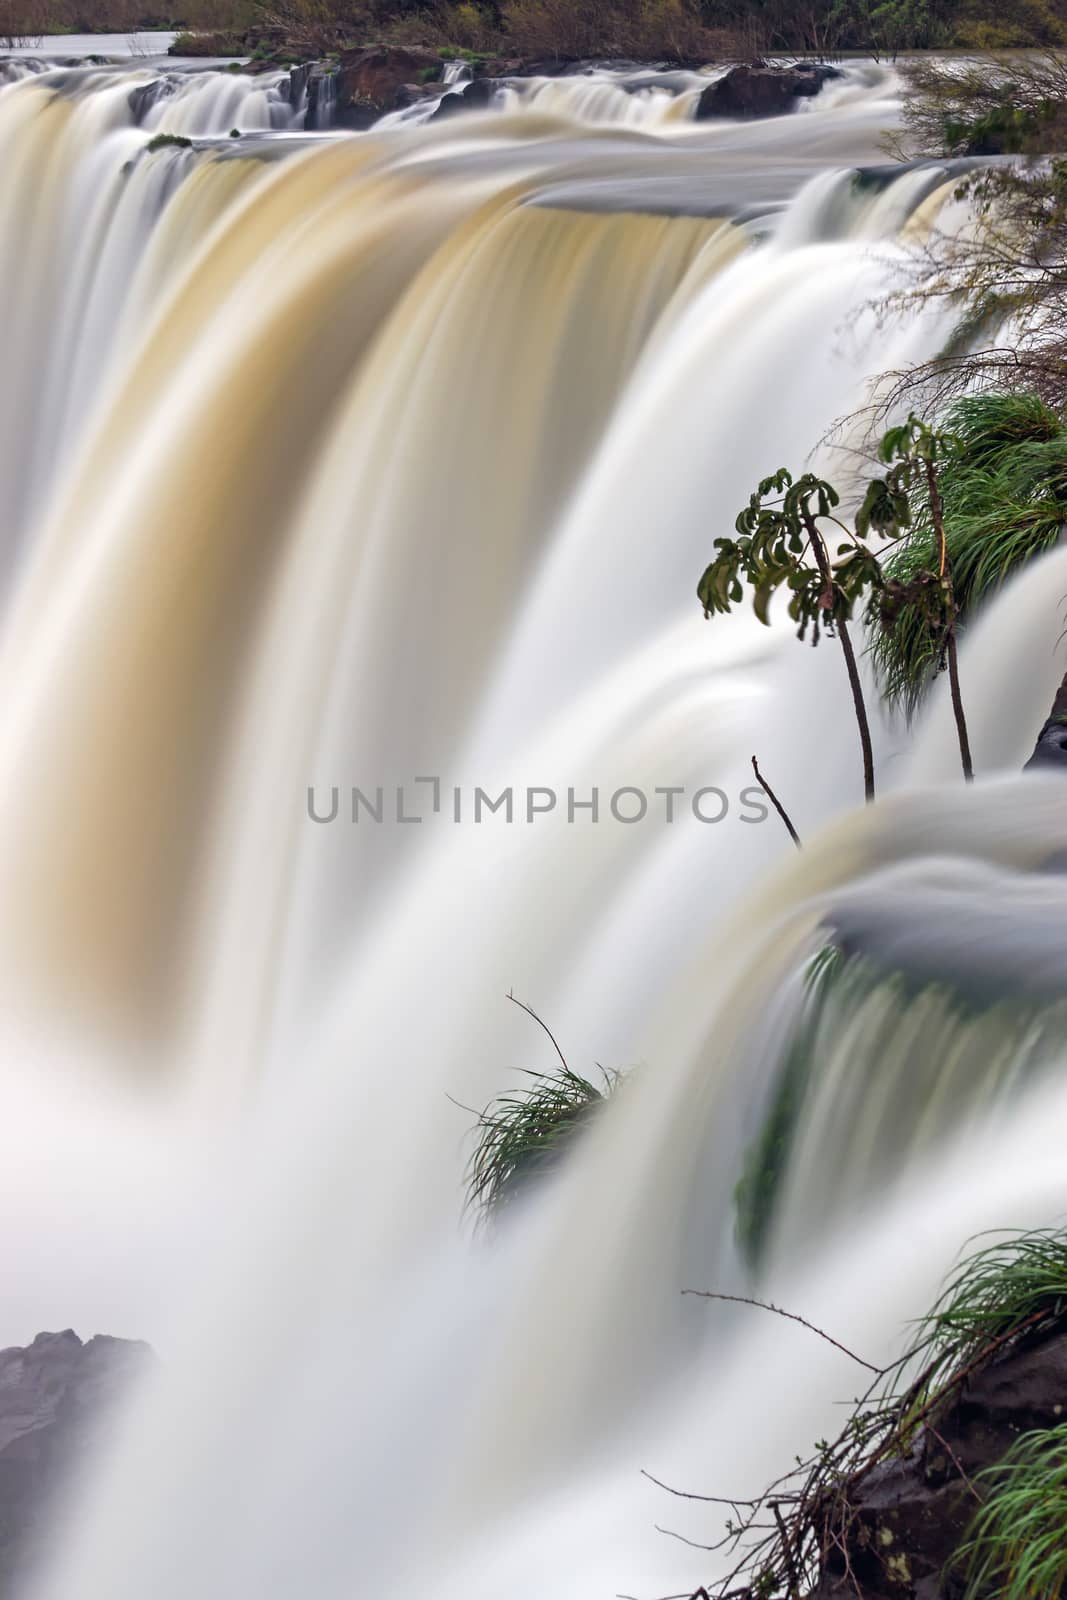 A detail of the Iguazu waterfall in Argentina with blurred motion